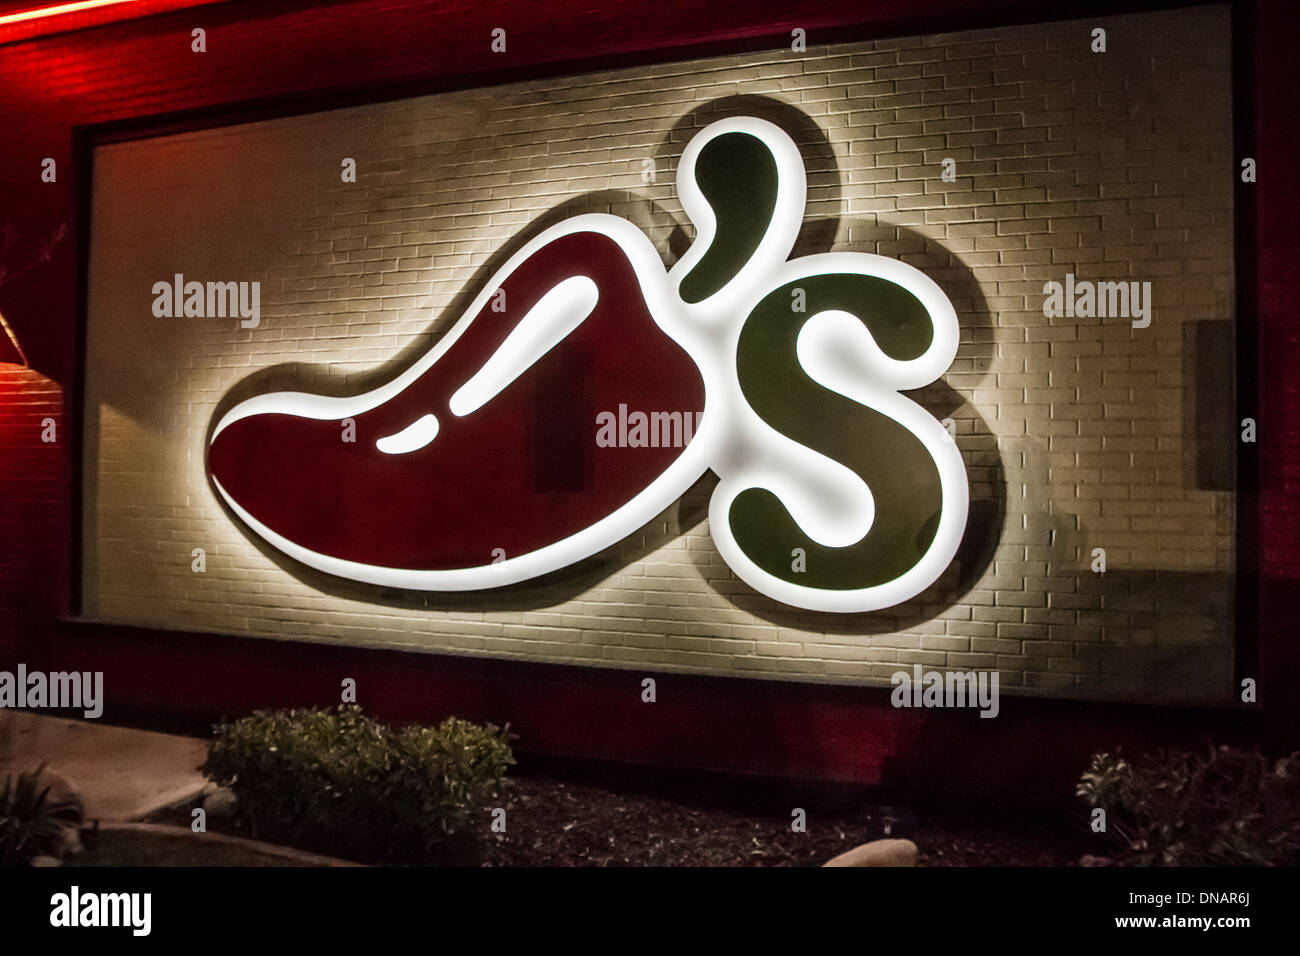 A Chili's restaurant in West Hills California Stock Photo